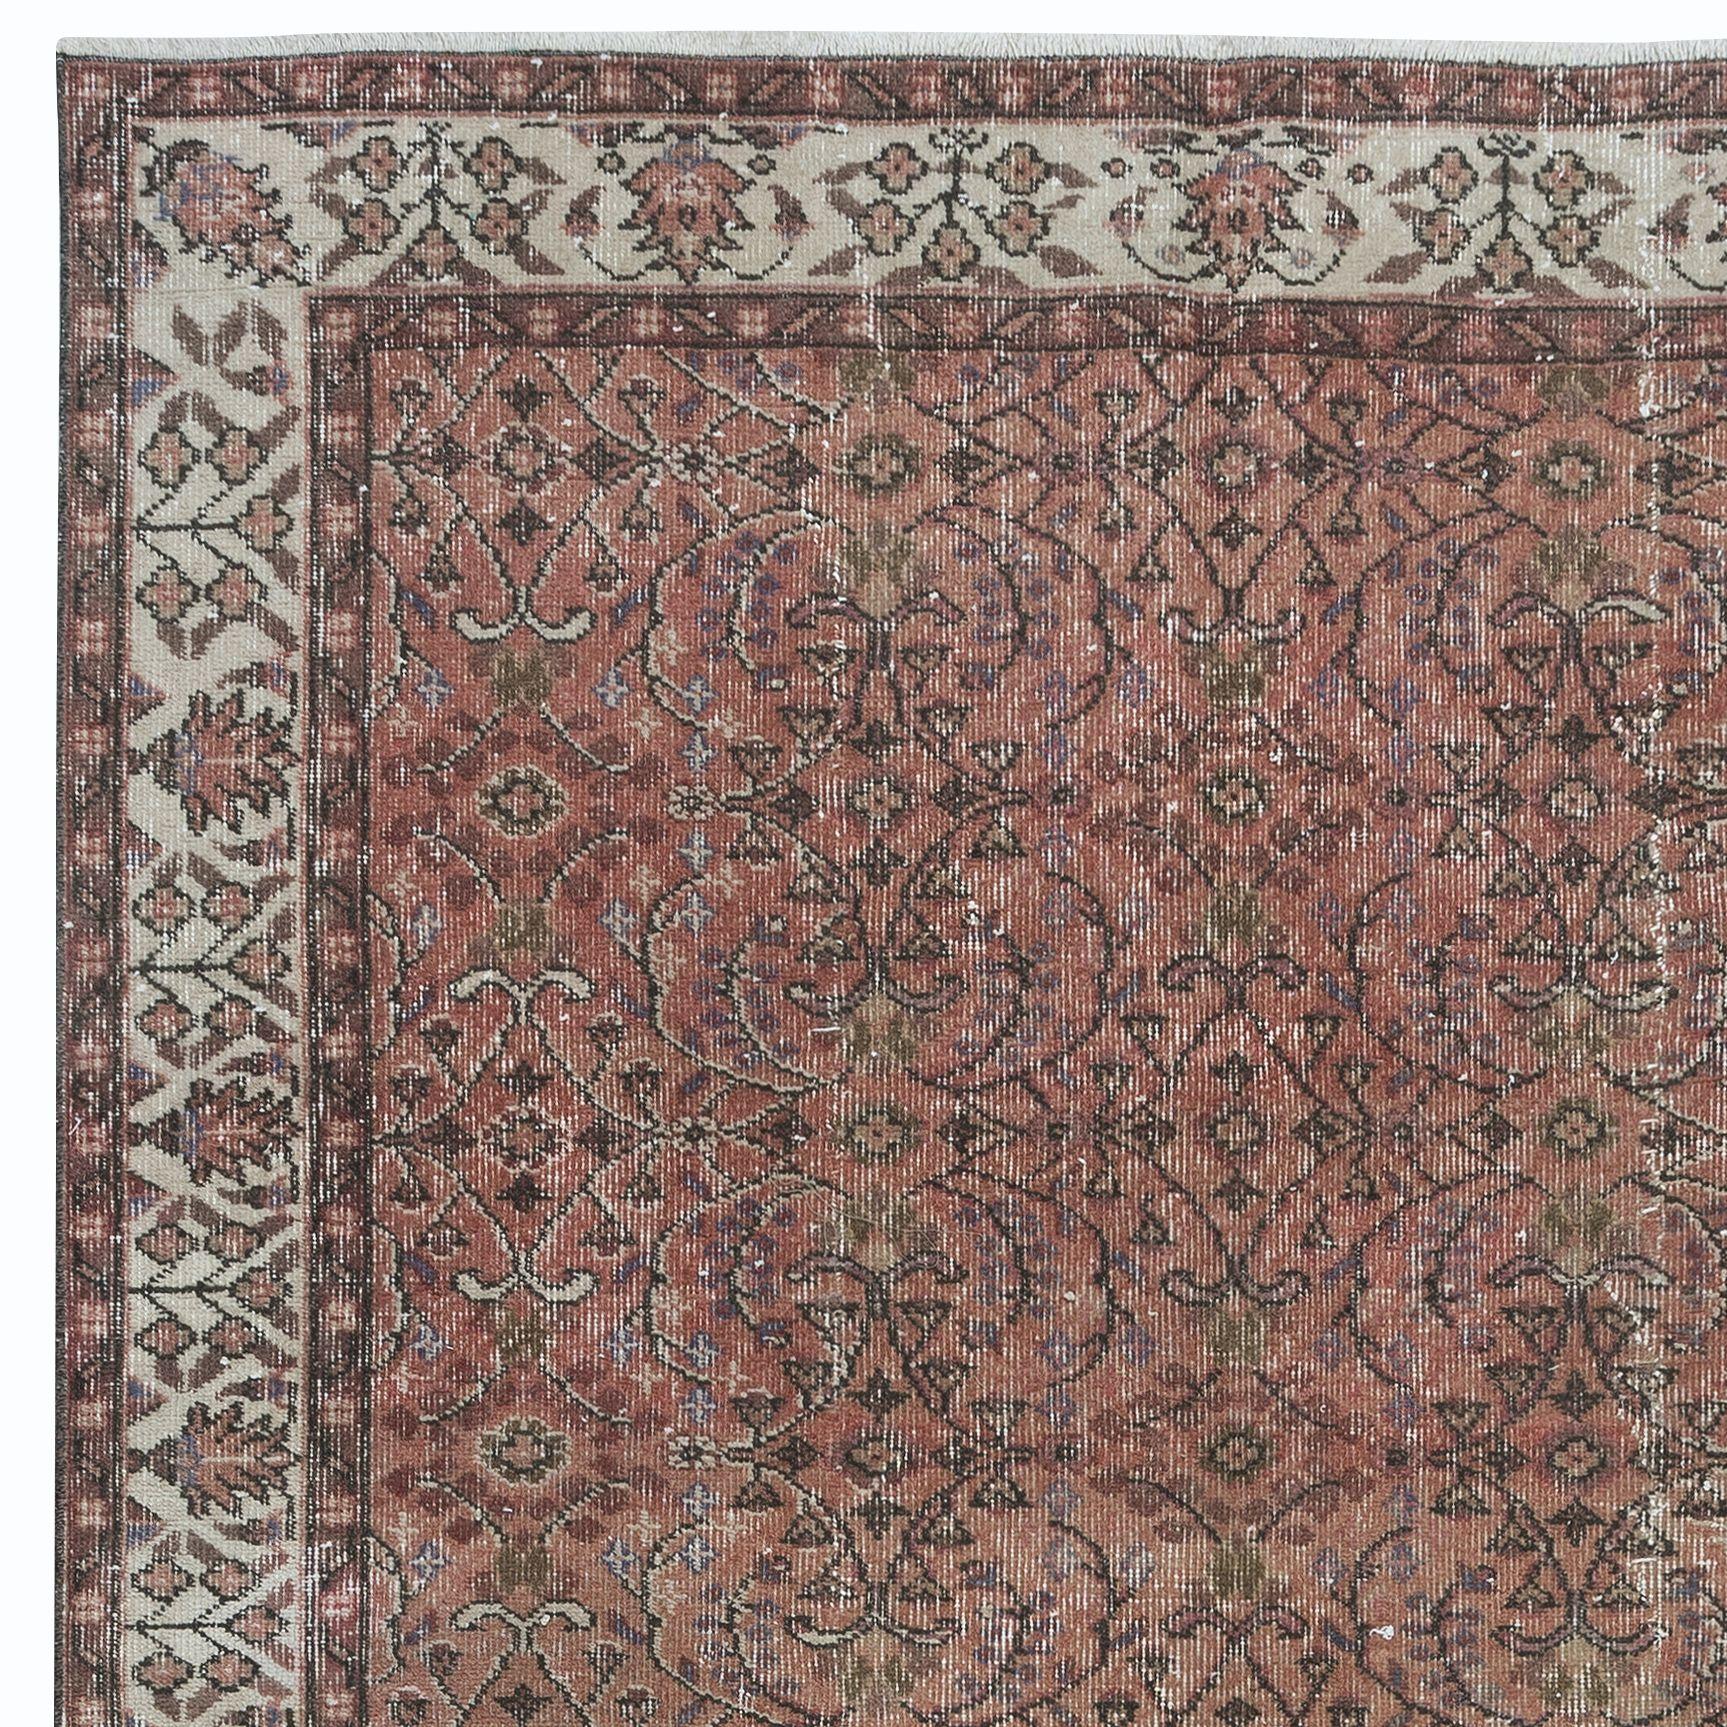 Hand-Knotted 5.4x8.8 Ft Vintage Turkish Area Rug in Red & Beige, Hand Knotted Floral Carpet For Sale